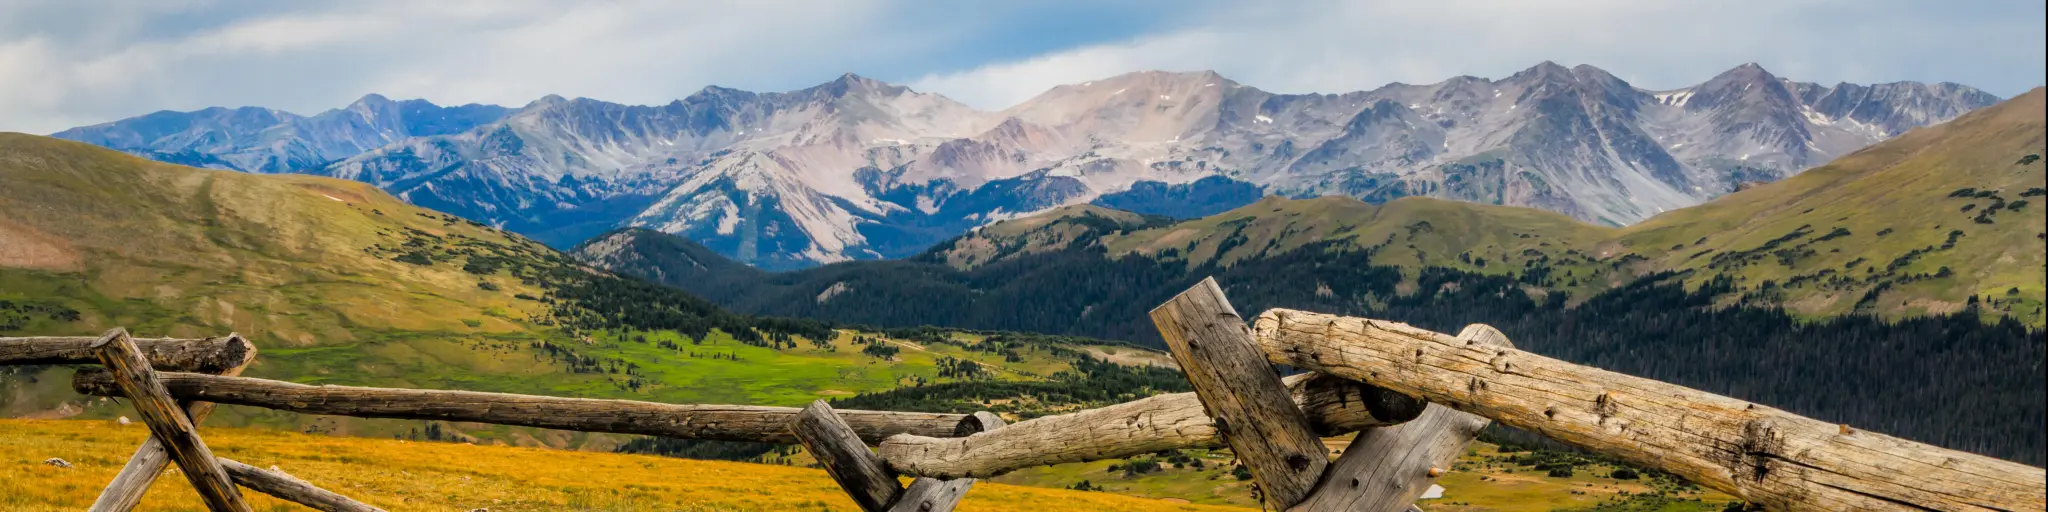 Rocky Mountains National Park, Colorado, USA with a fence in the foreground with distant mountains.